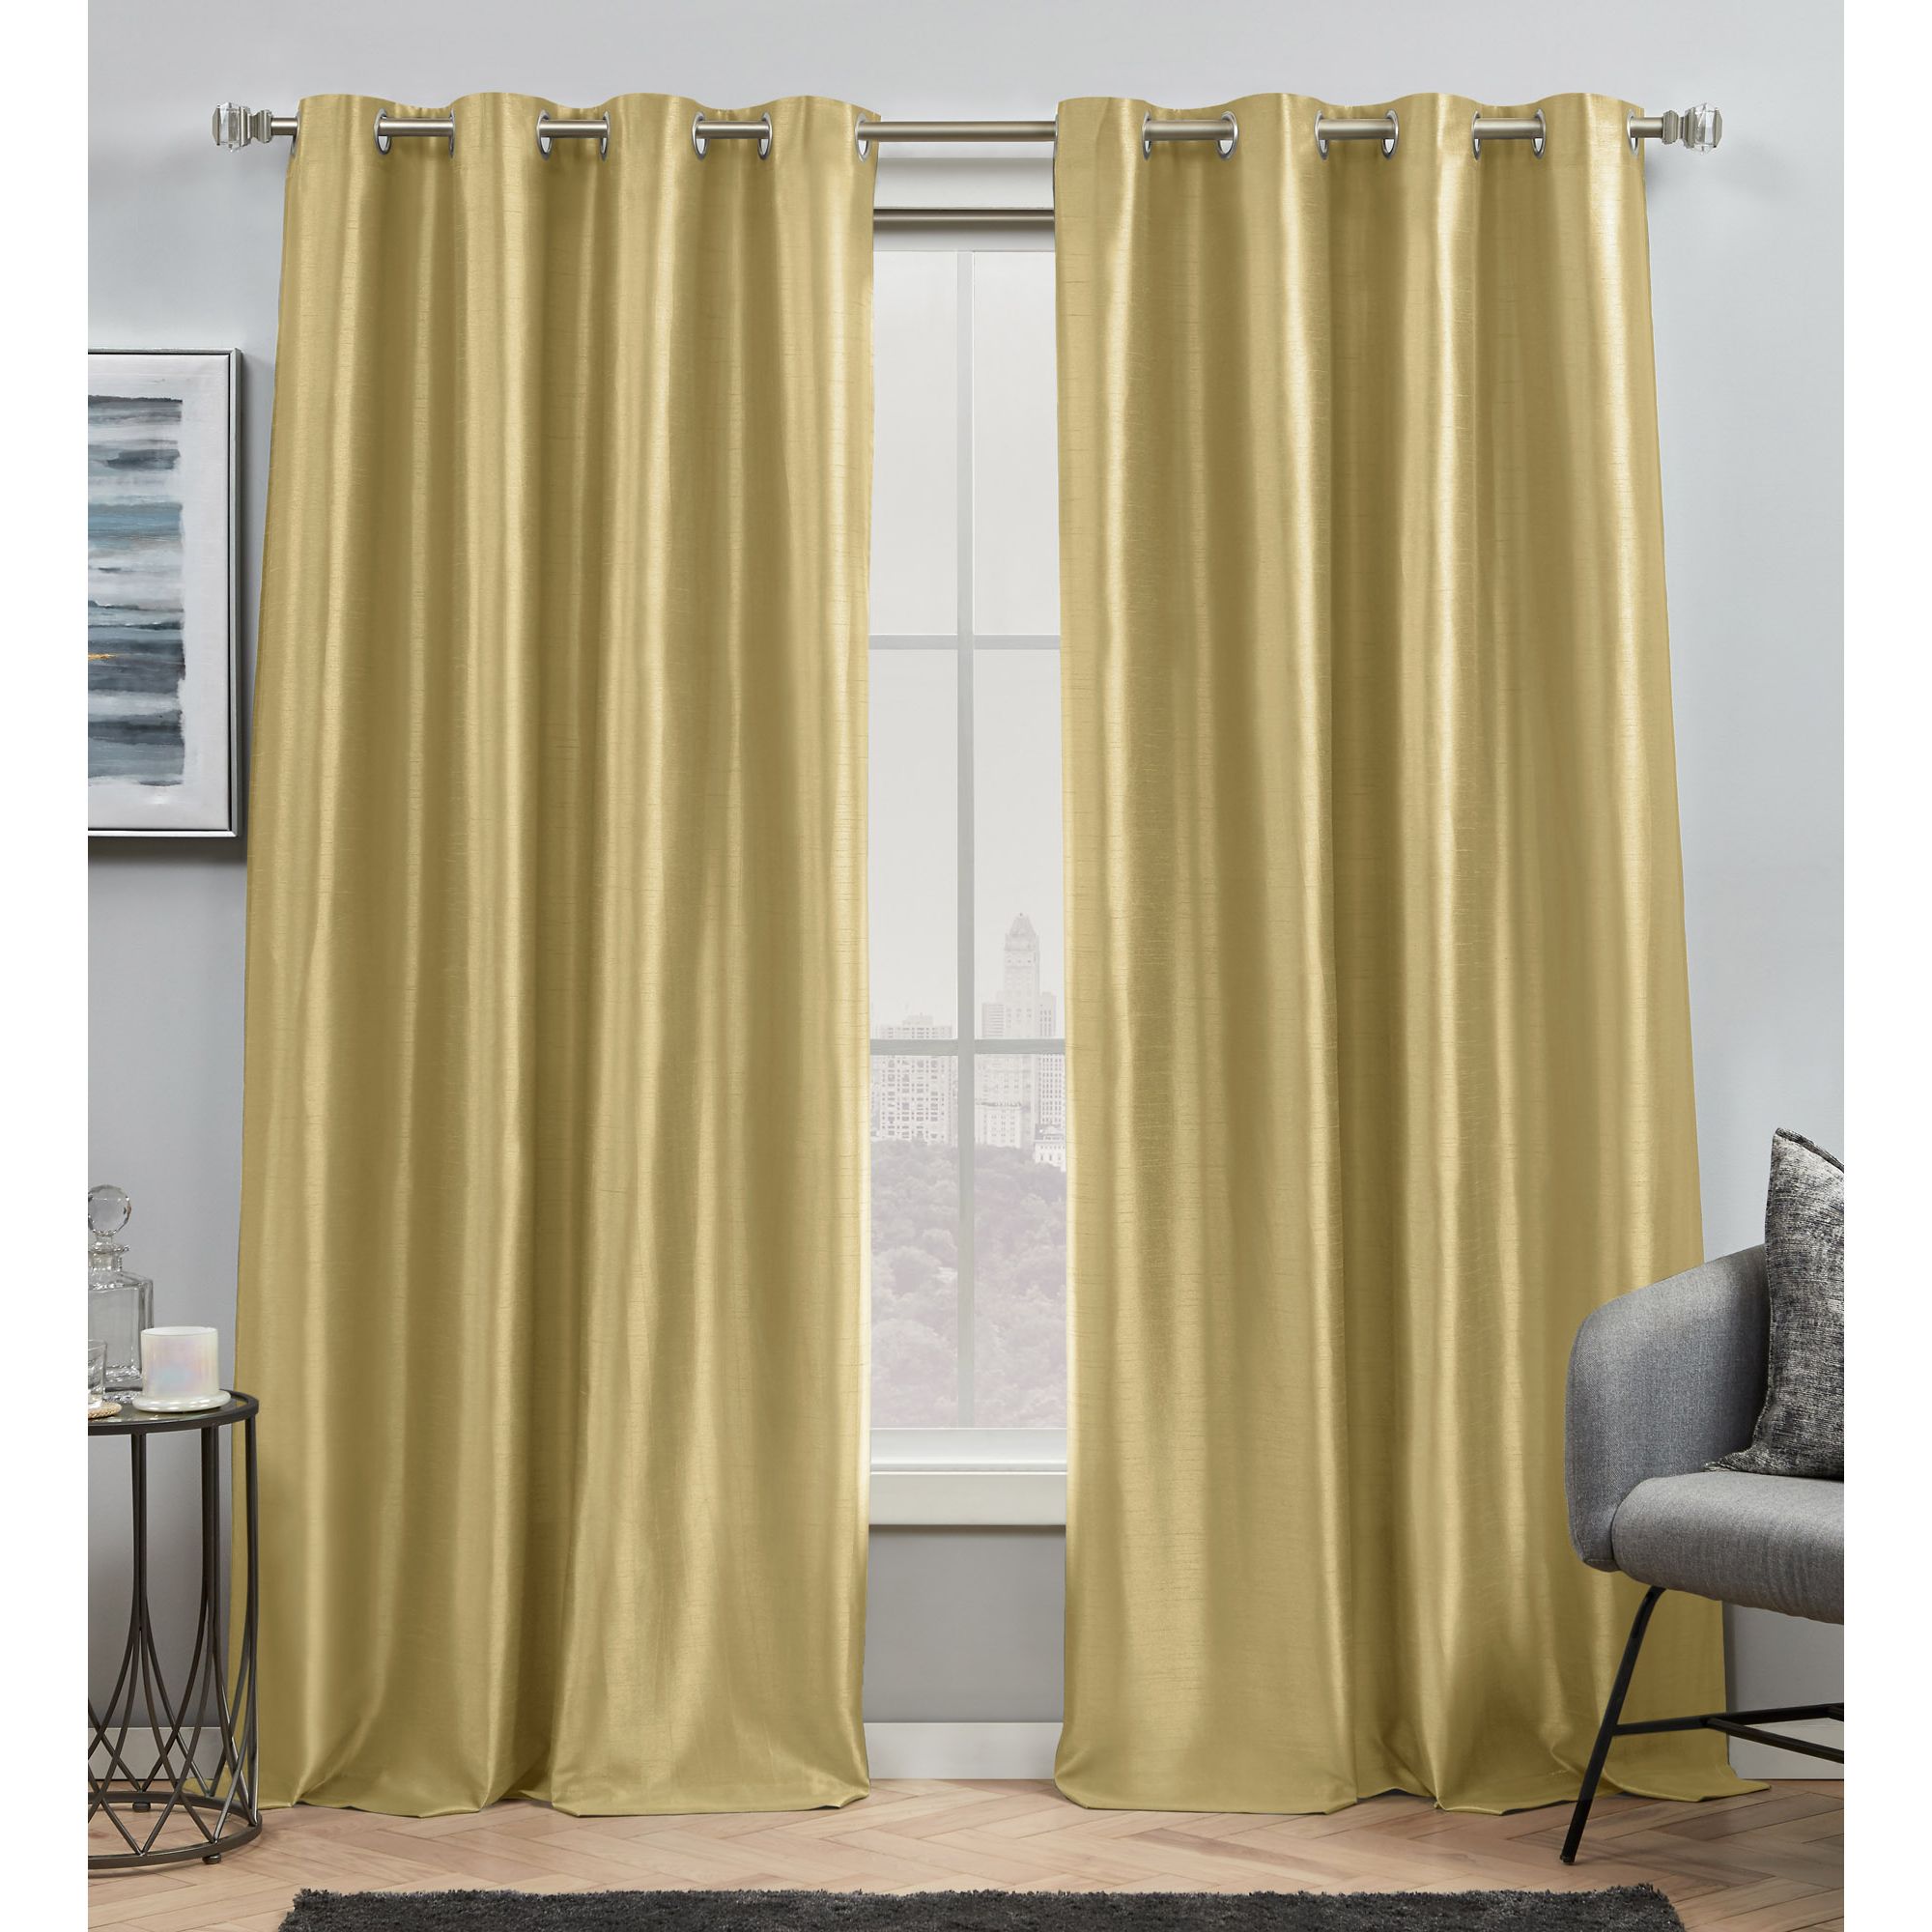 Becca Drapery Curtain Panels with Grommets 